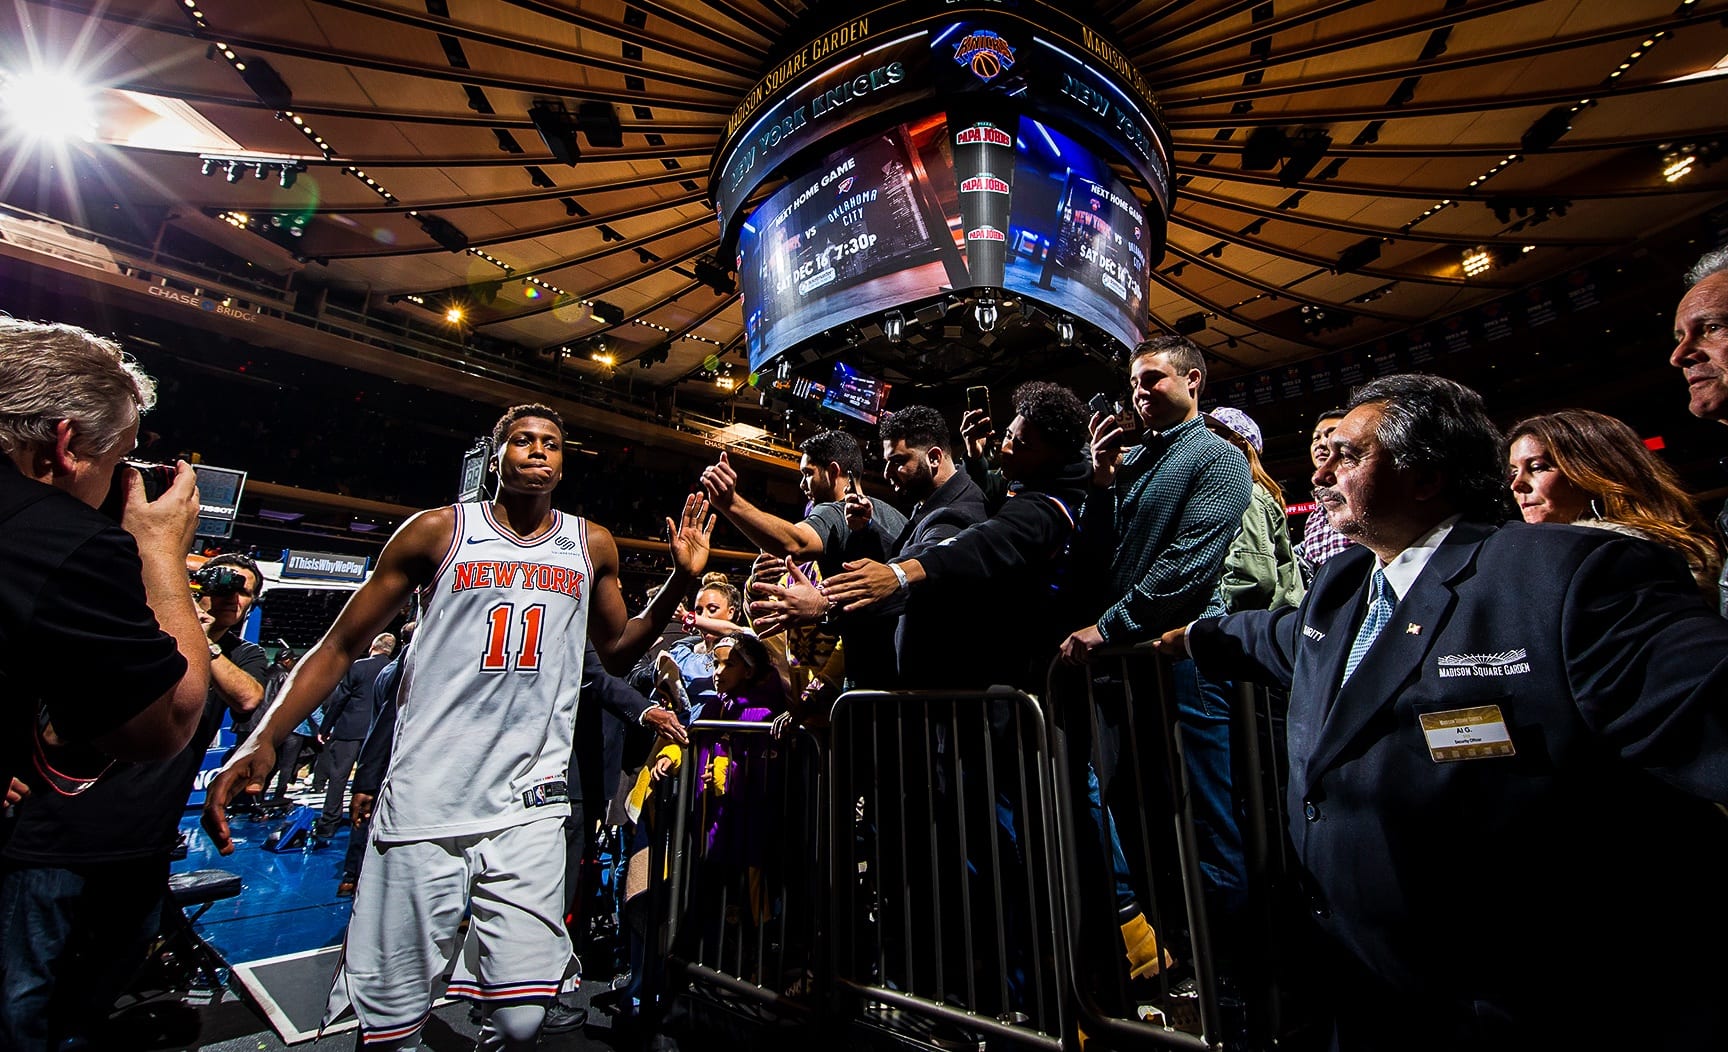 December 12, 2017: The New York Knicks defeat the Los Angeles Lakers in overtime, 113-109, at Madison Square Garden in New York City.